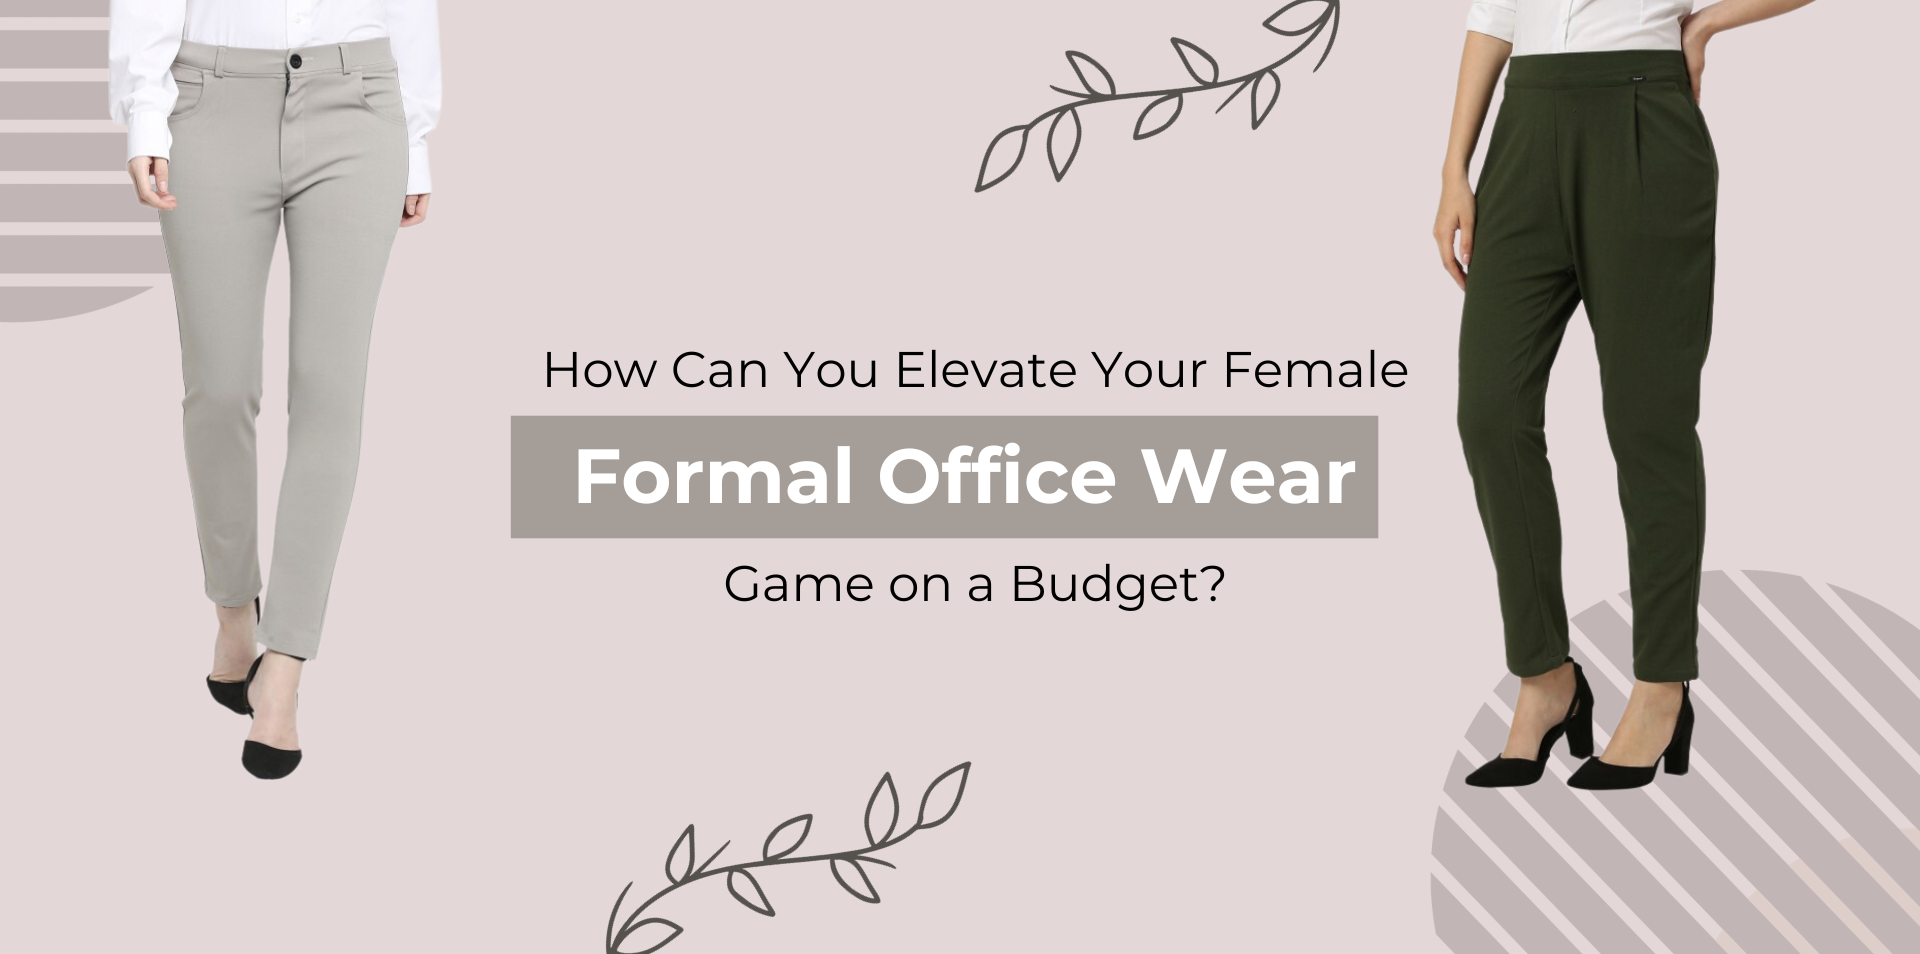 How Can You Elevate Your Female Formal Office Wear Game on a Budget?